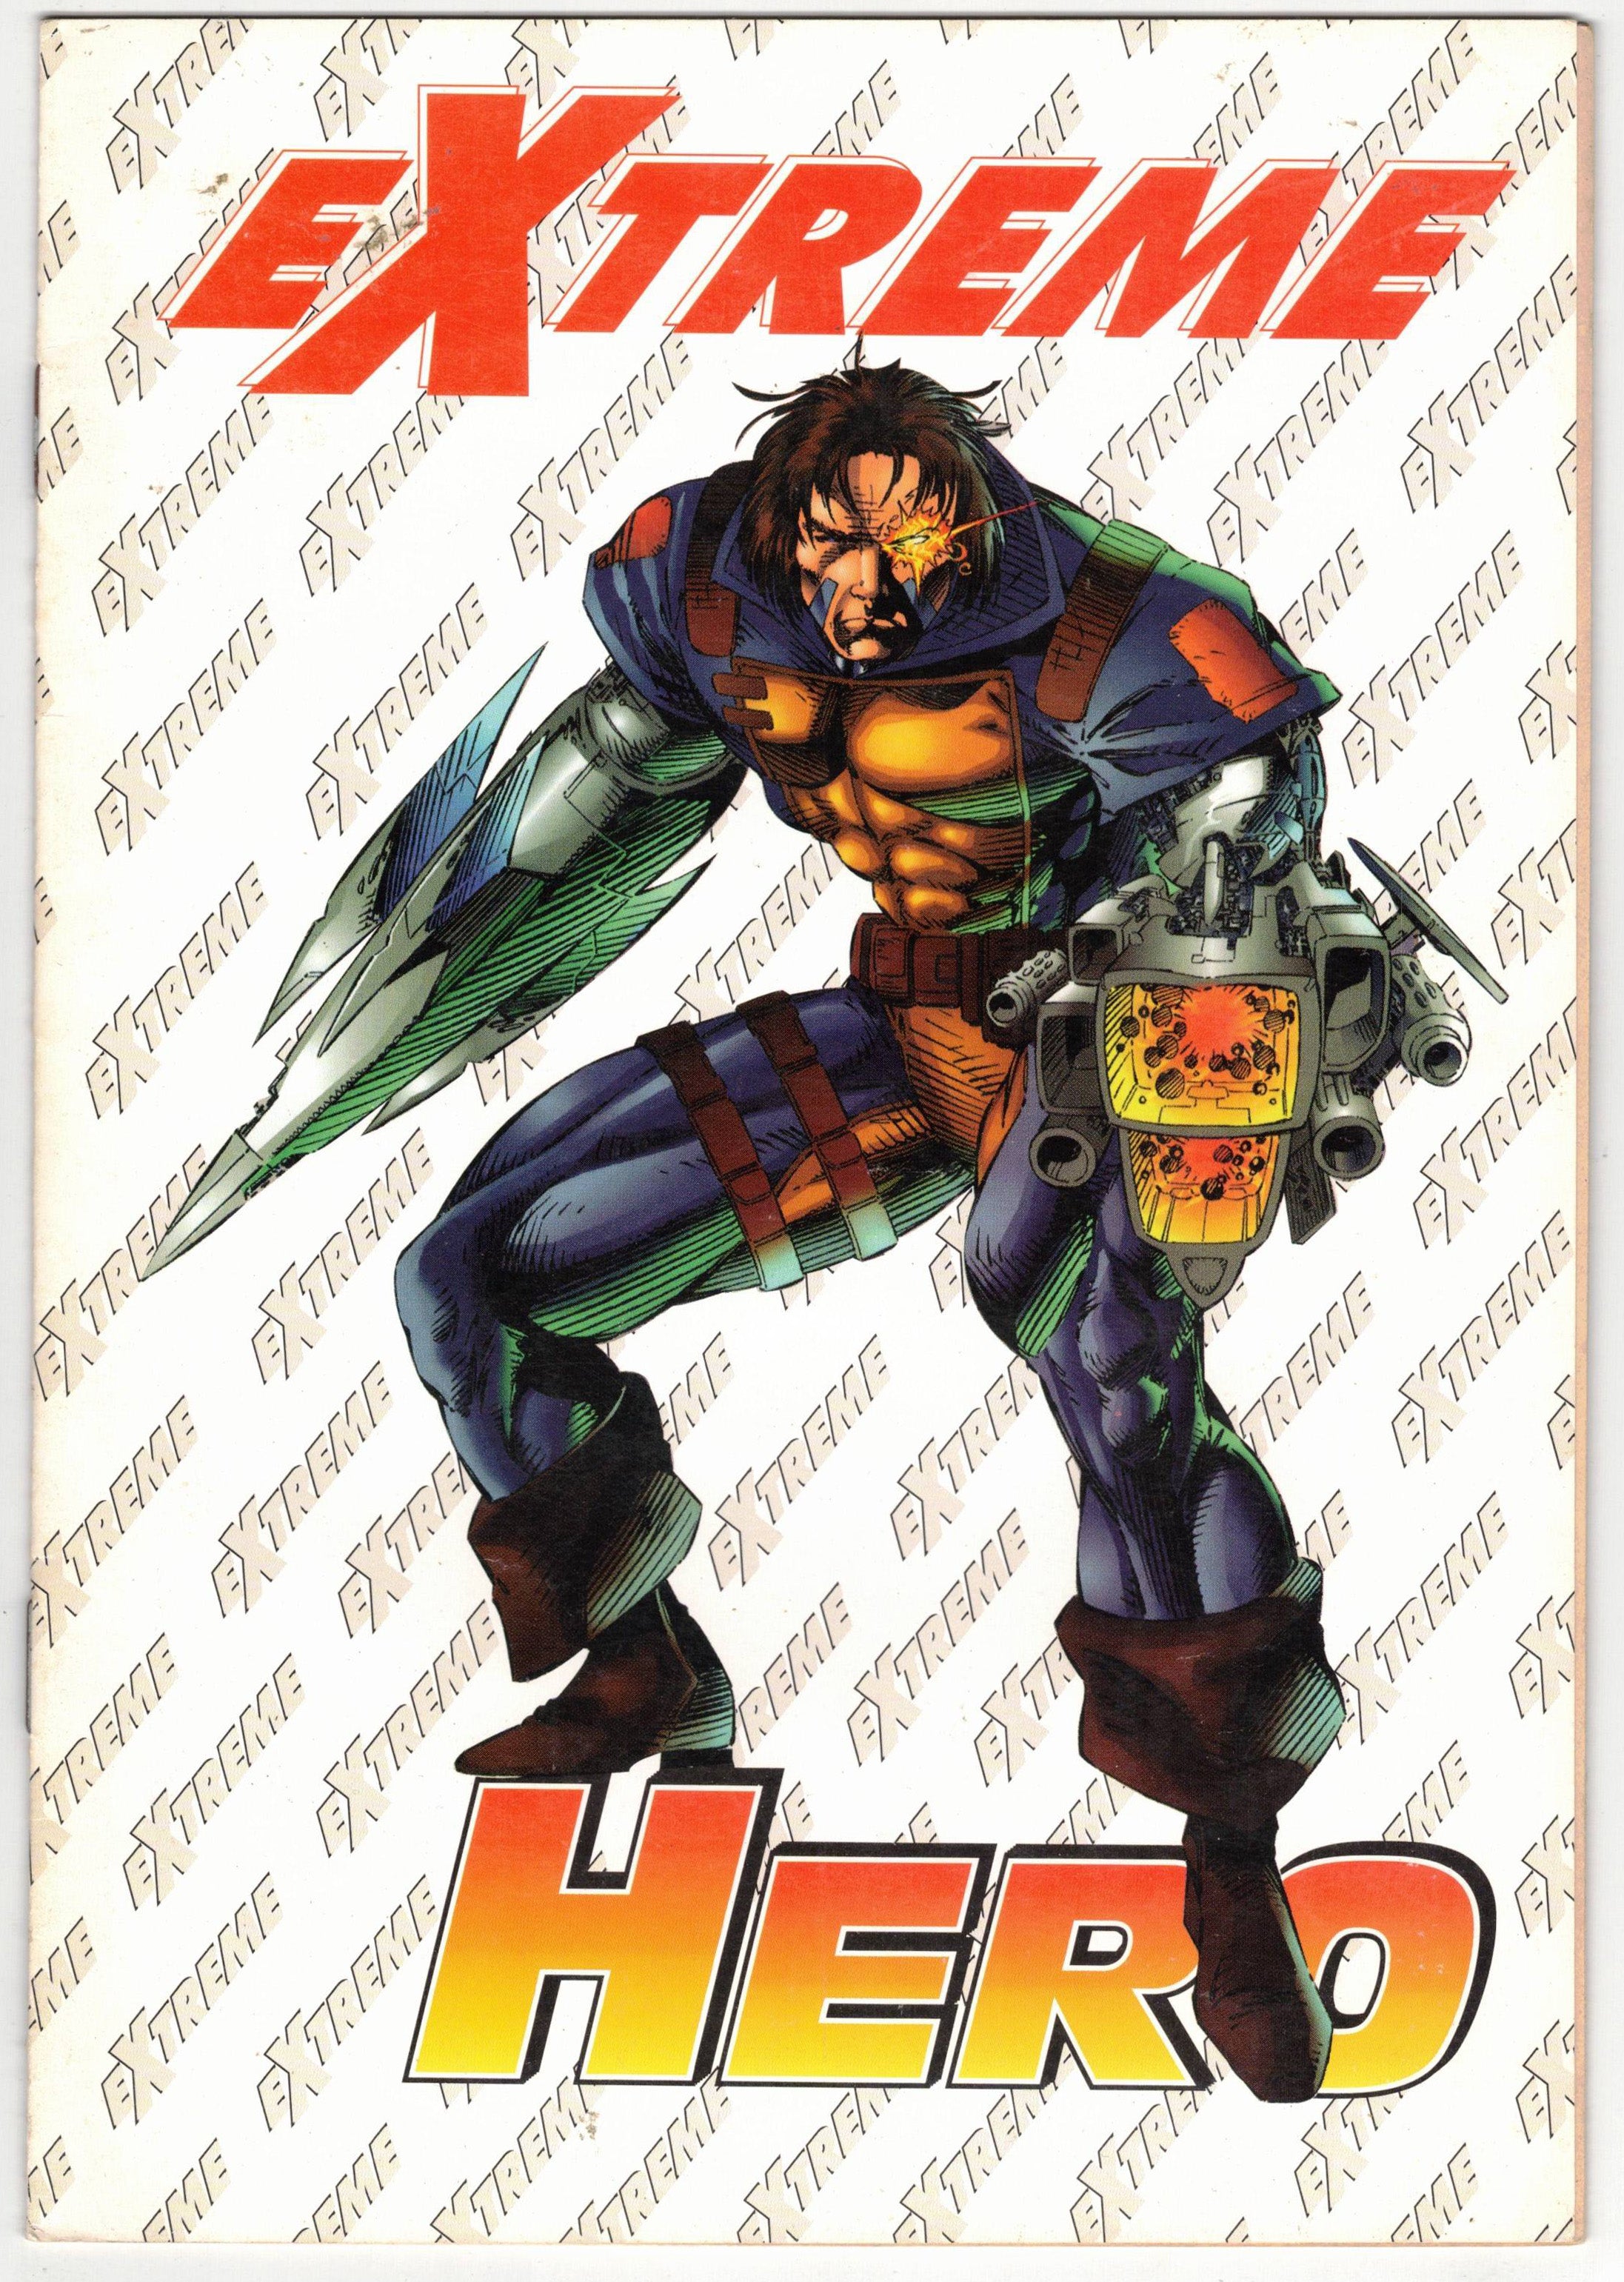 Photo of Extreme Hero (1994) Issue 1 - Very Fine - Comic sold by Stronghold Collectibles